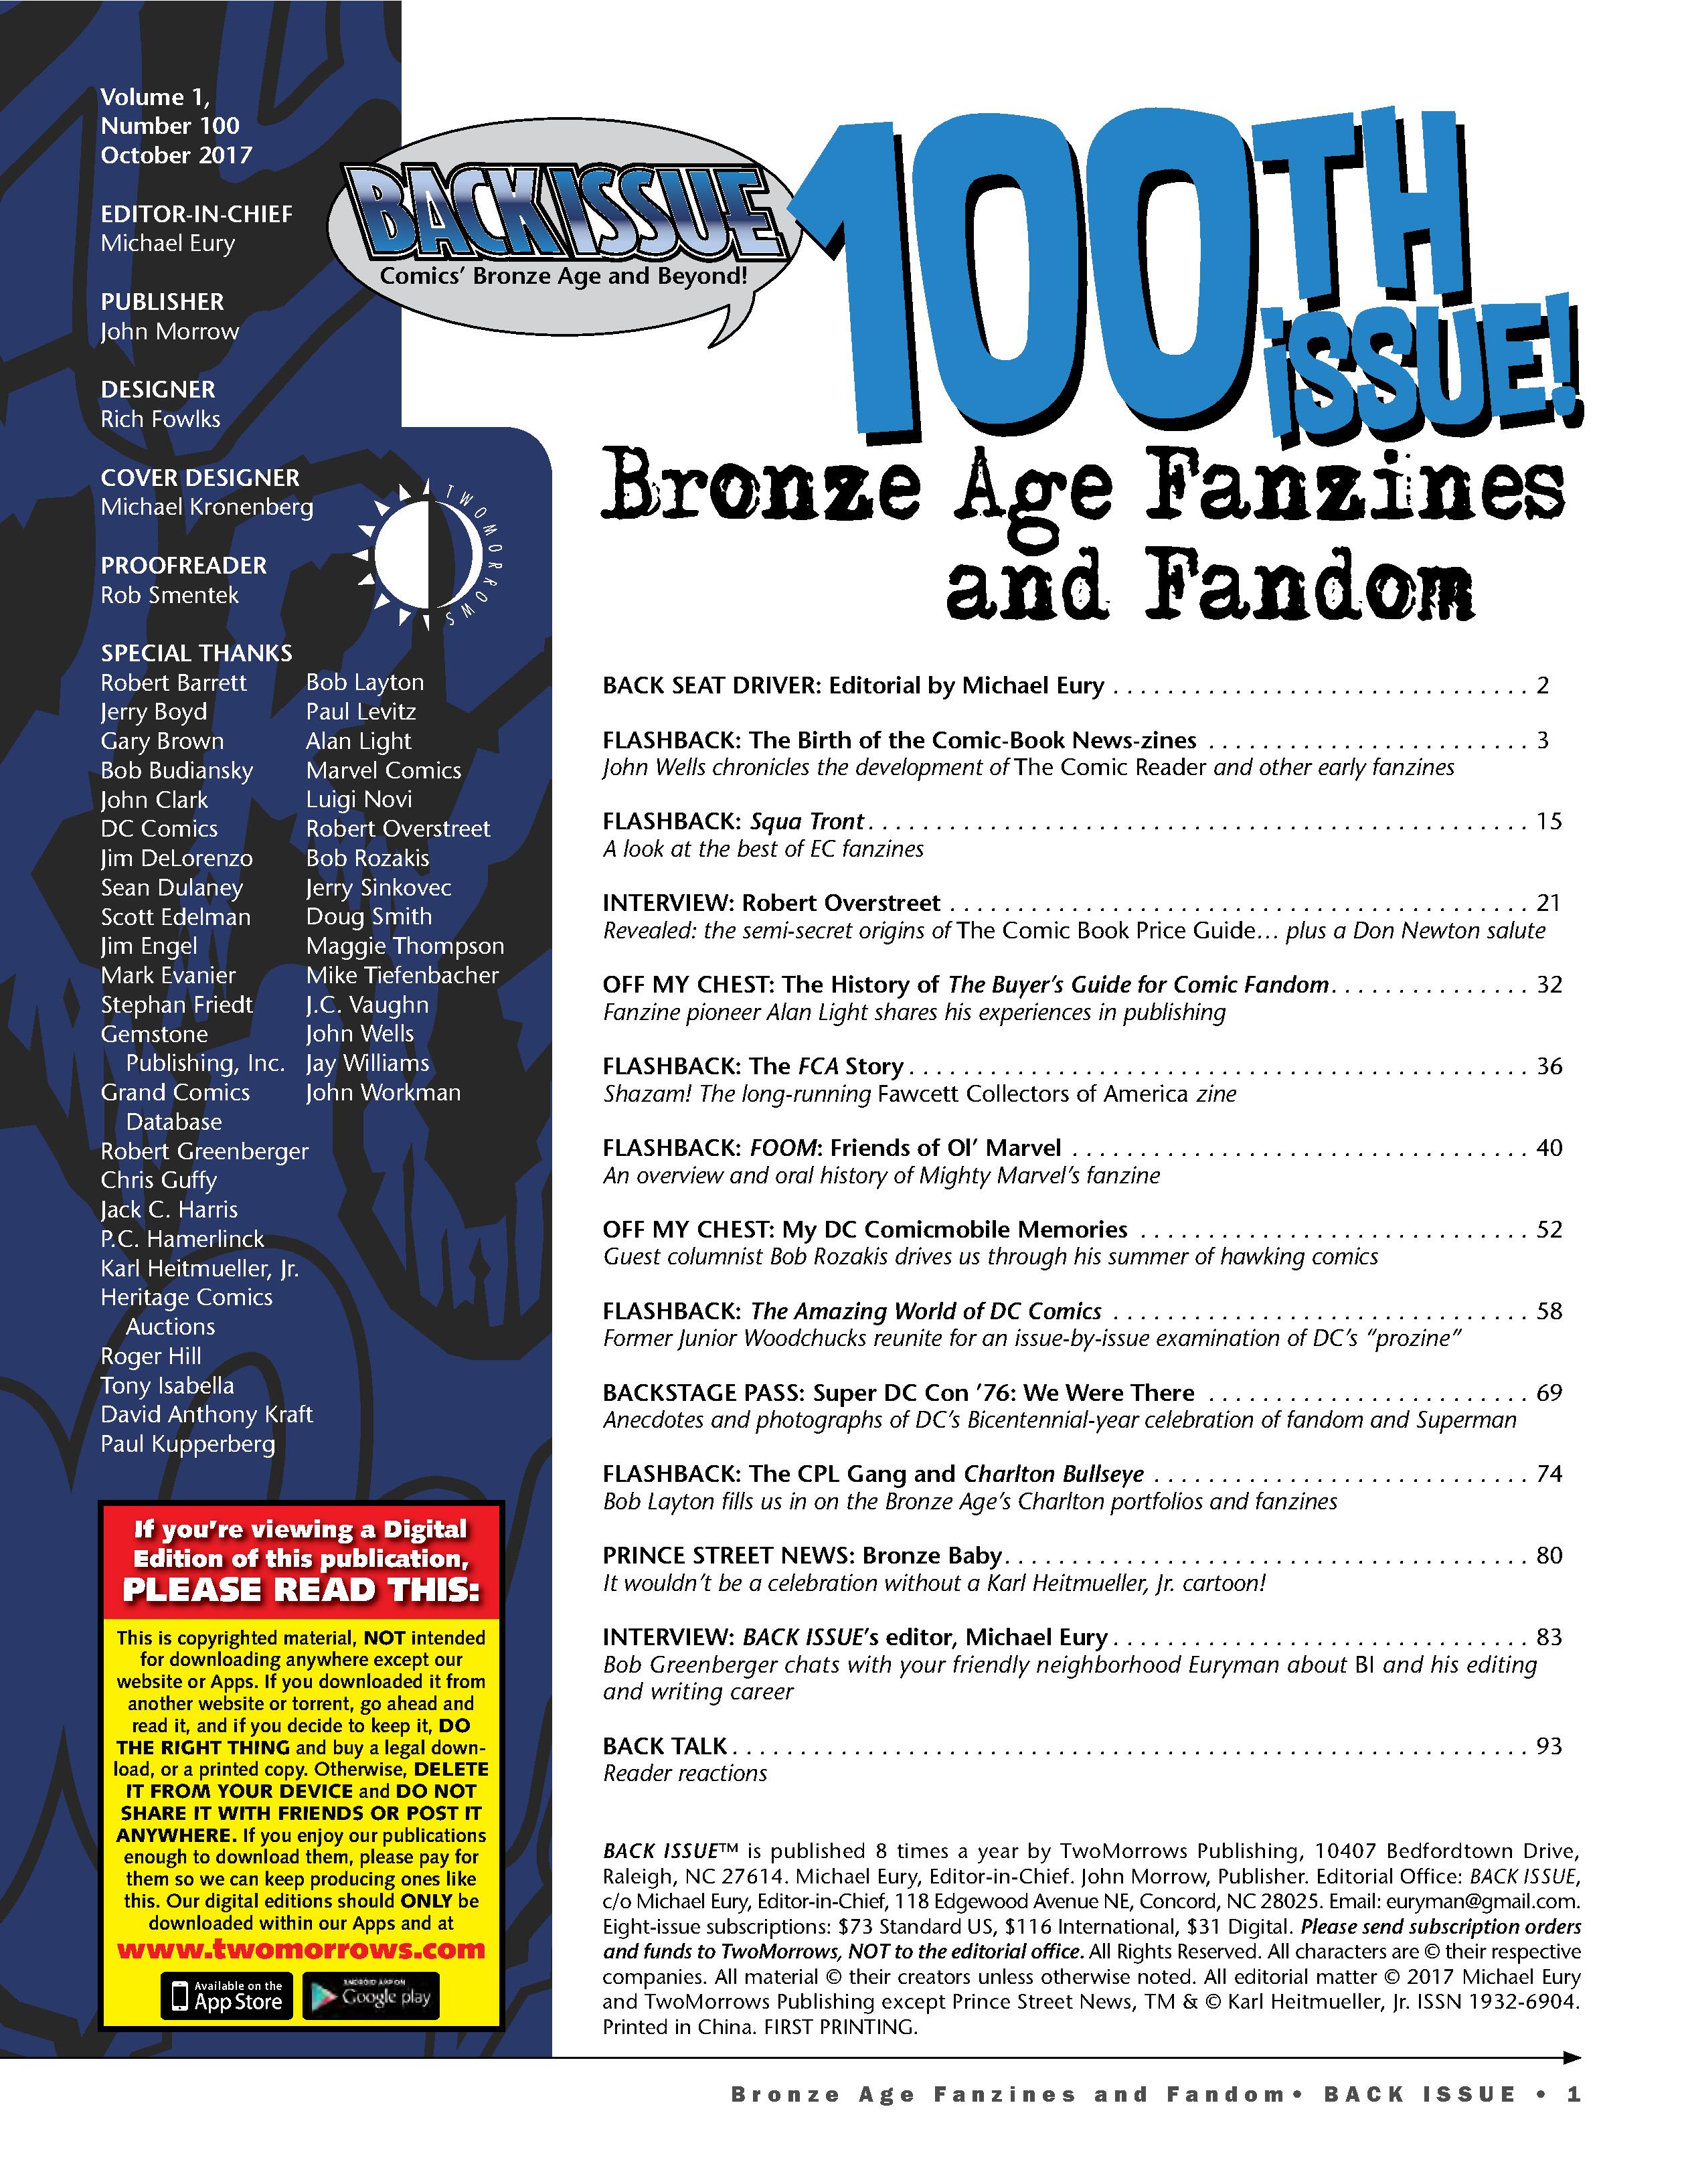 Read online Back Issue comic -  Issue #100 - 3